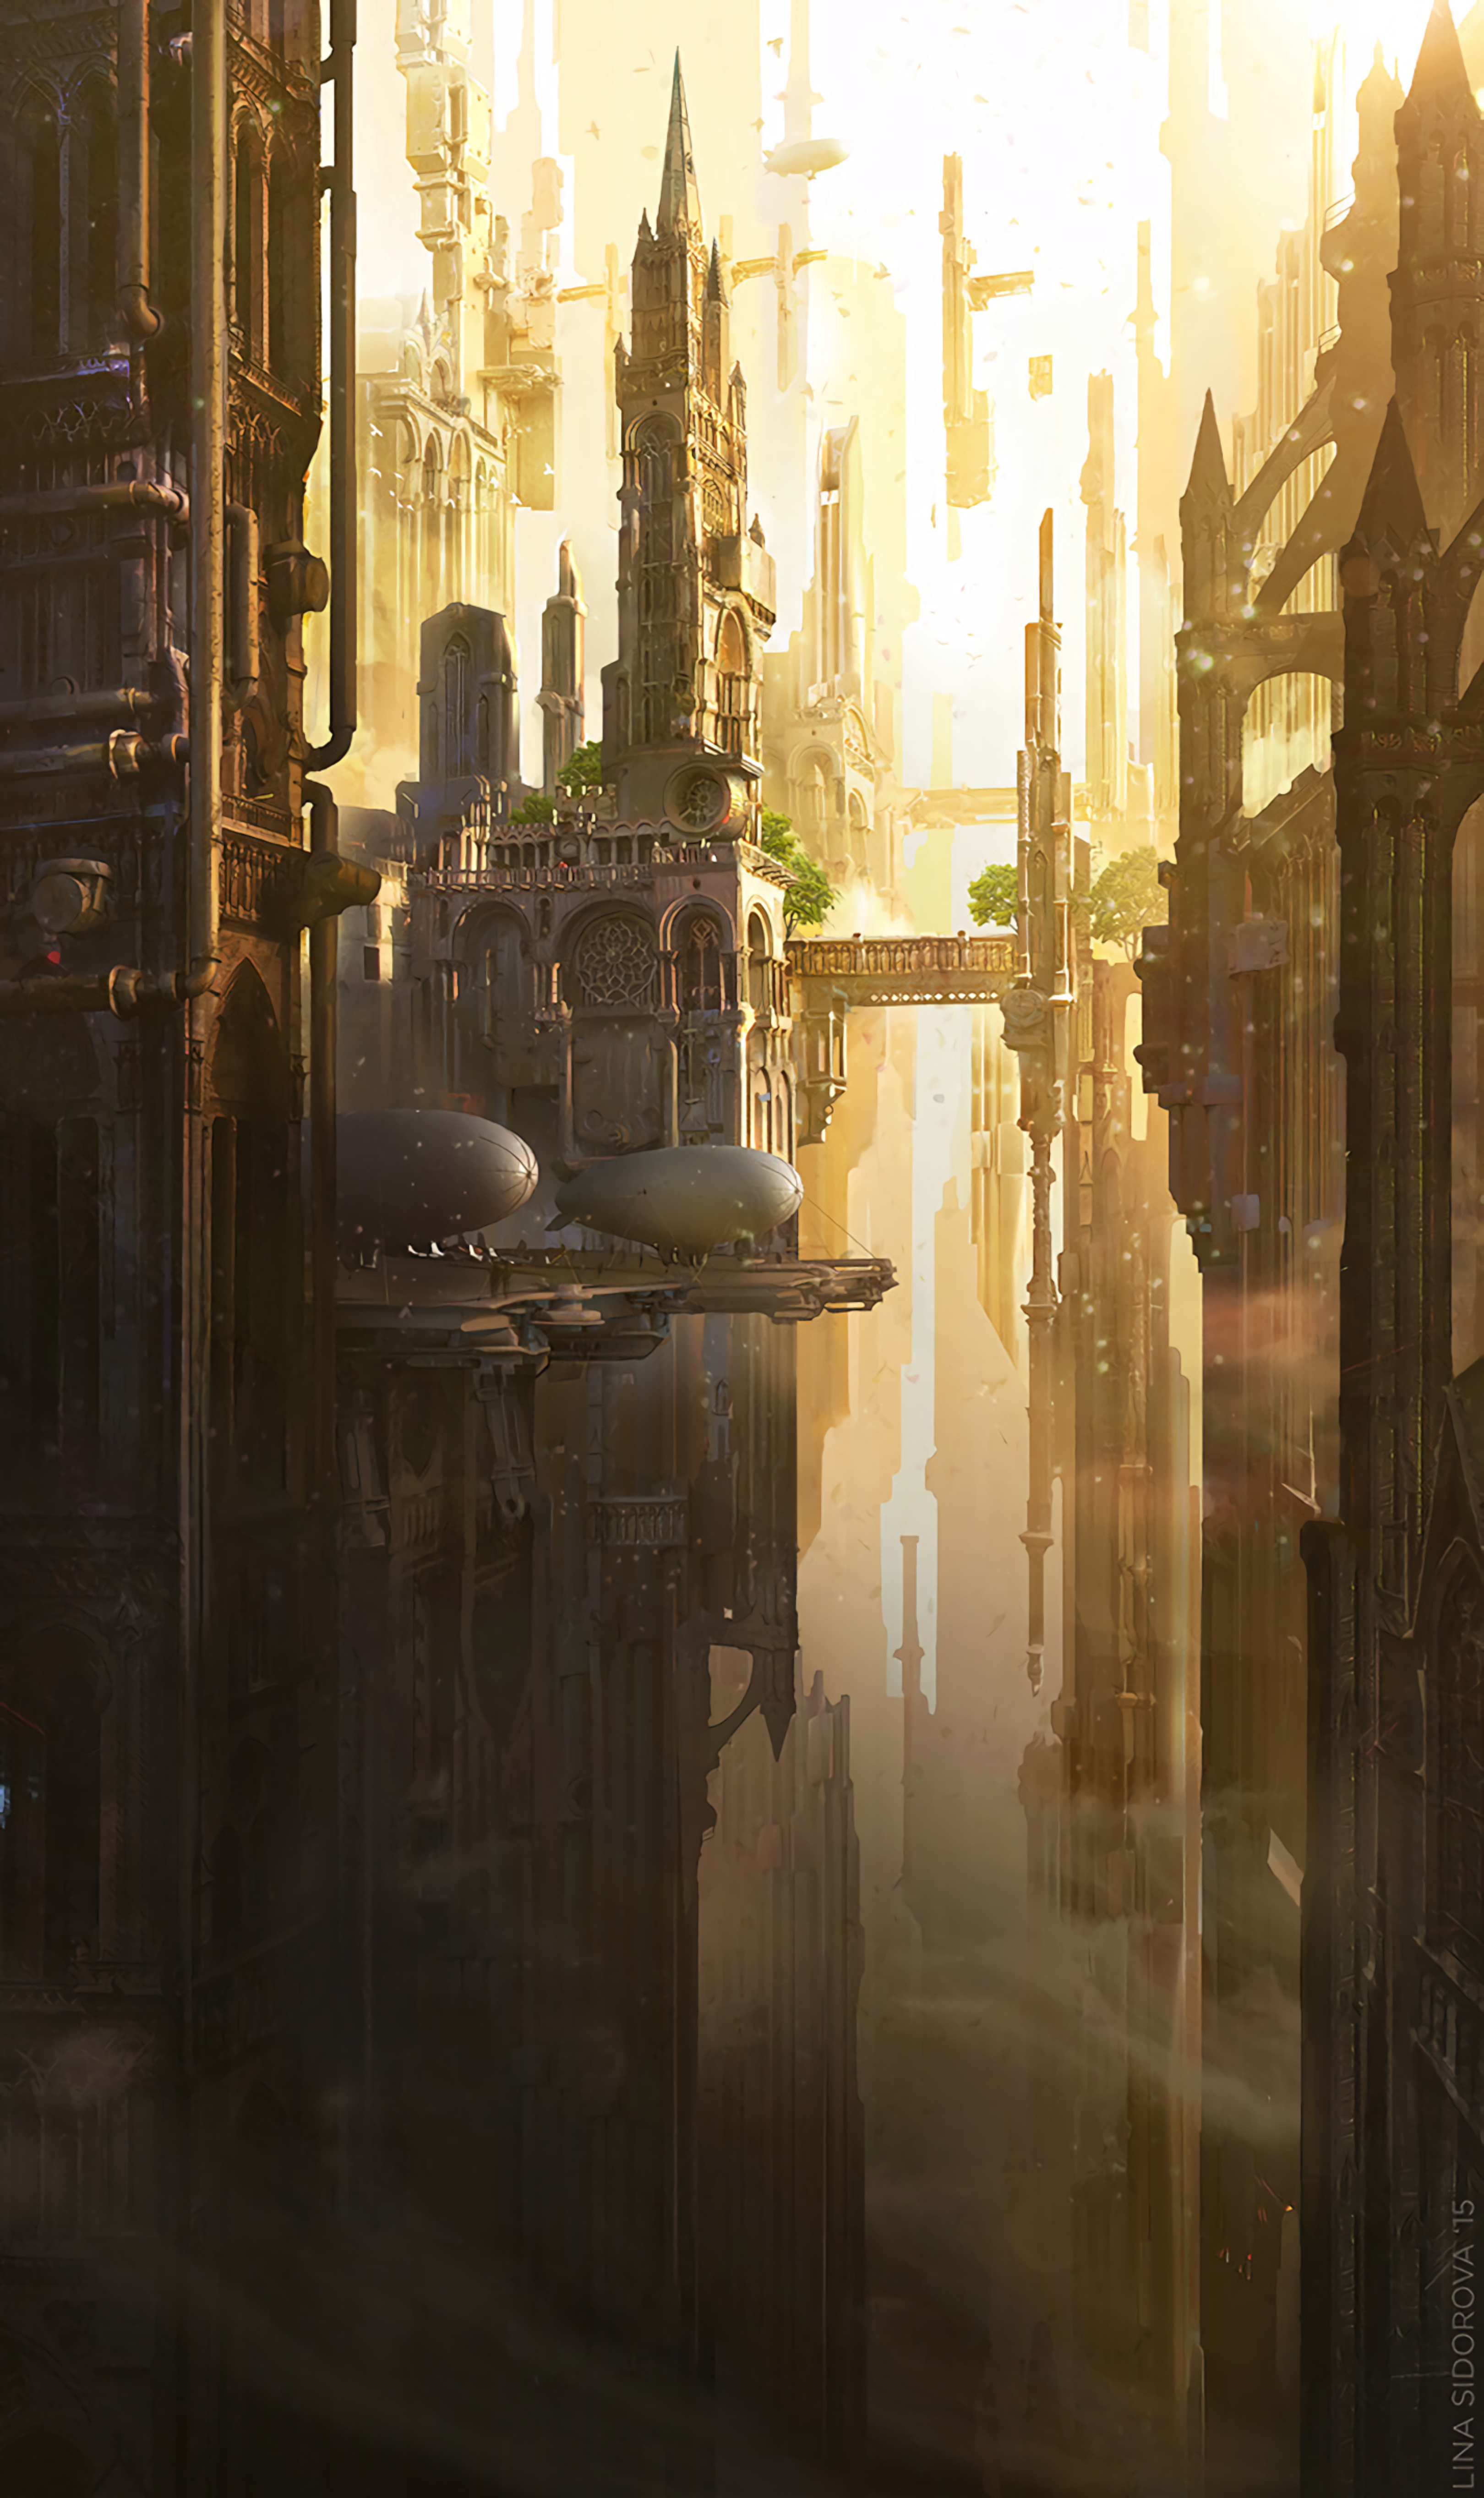 Full HD Wallpaper building, city, that's incredible, art, architecture, fiction, airships